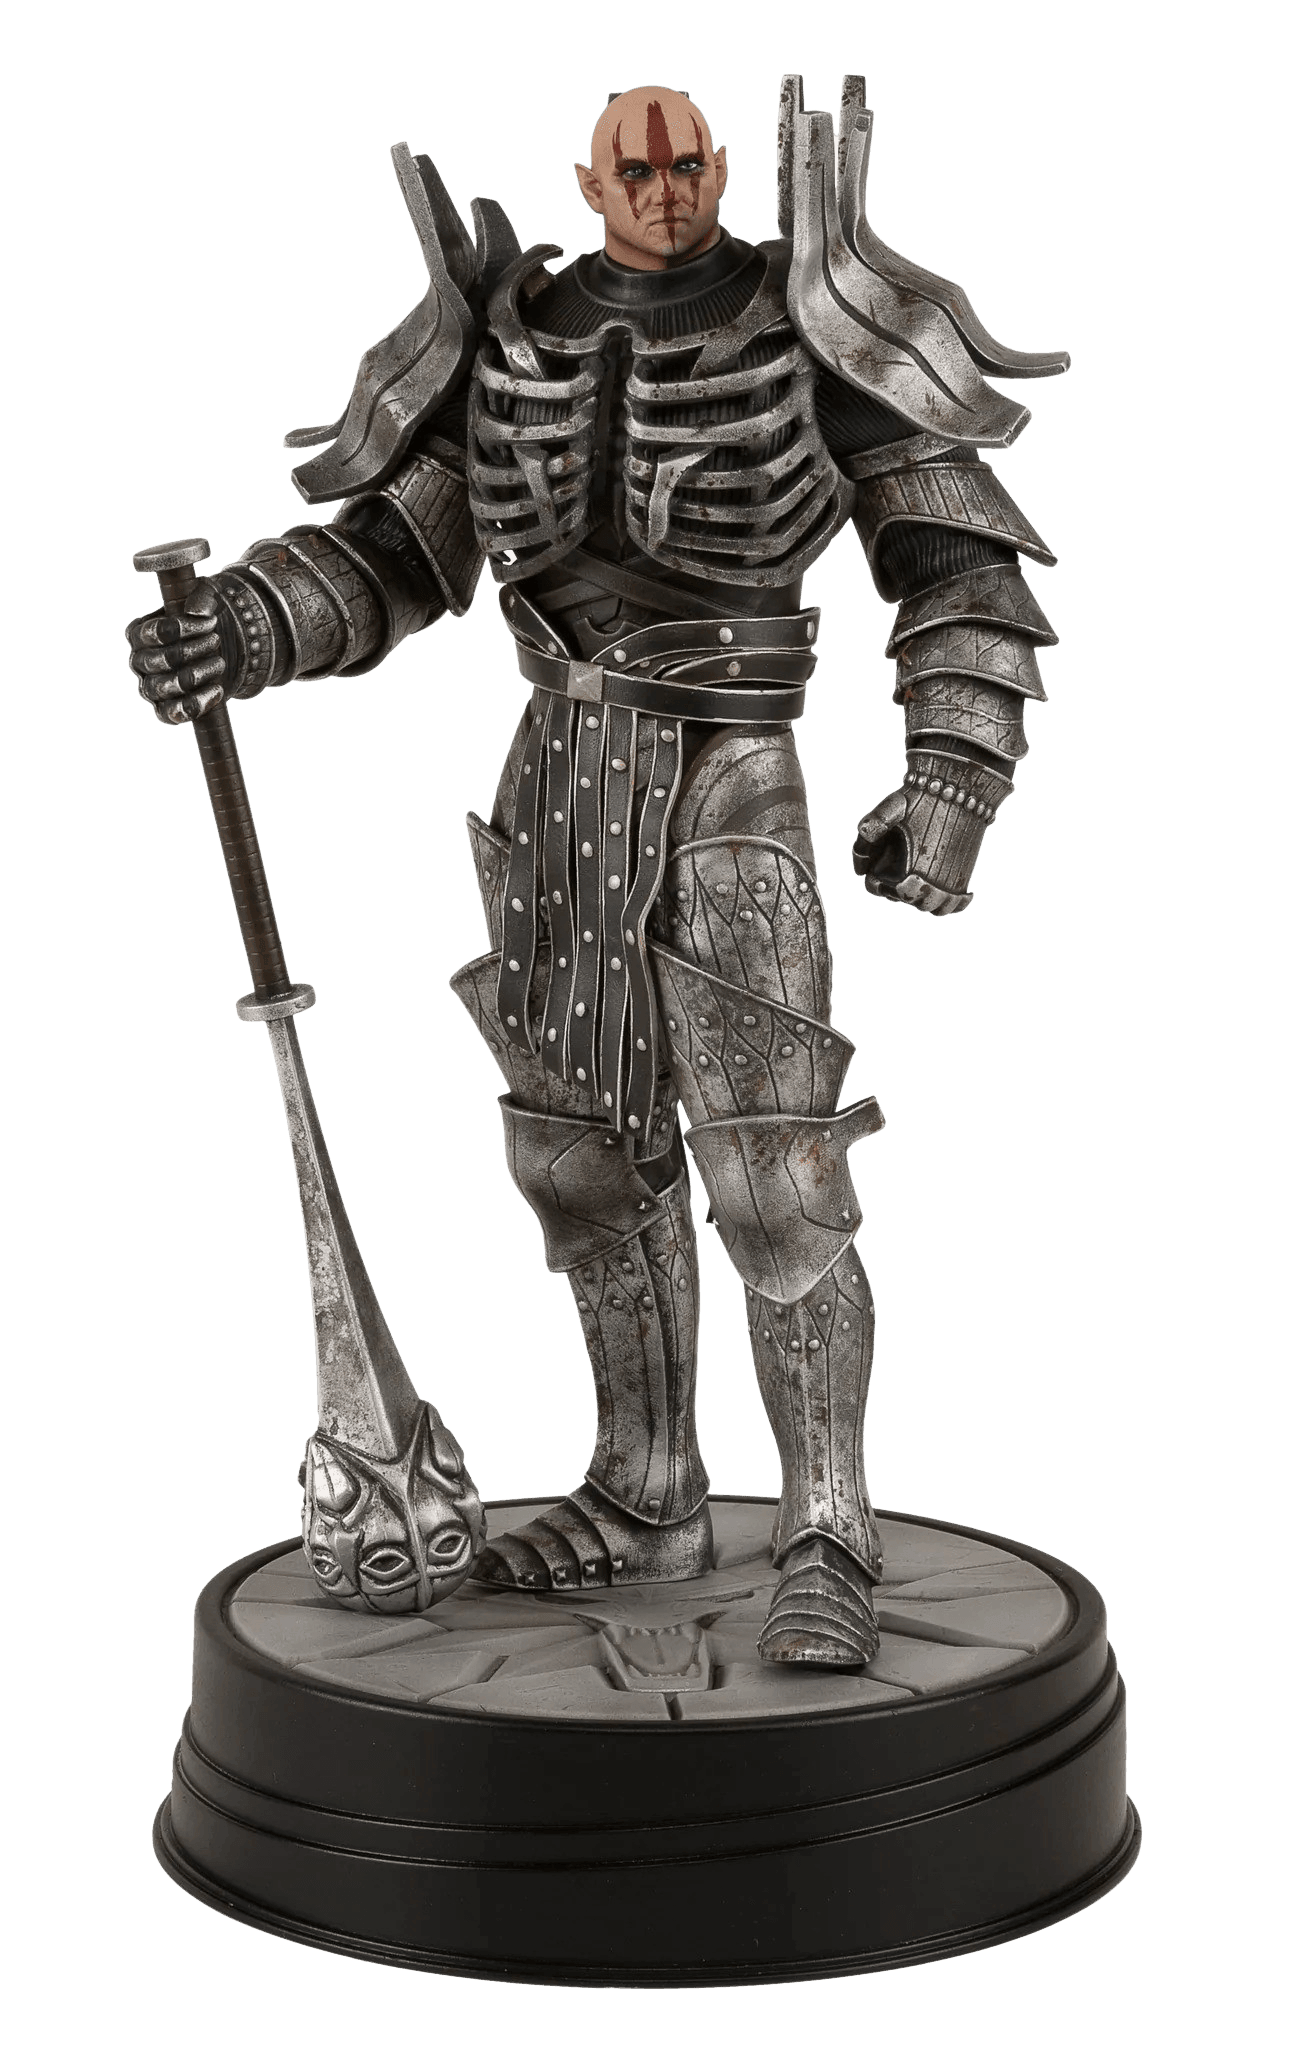 The Witcher 3: Wild Hunt - Imlerith Figure - The Card Vault